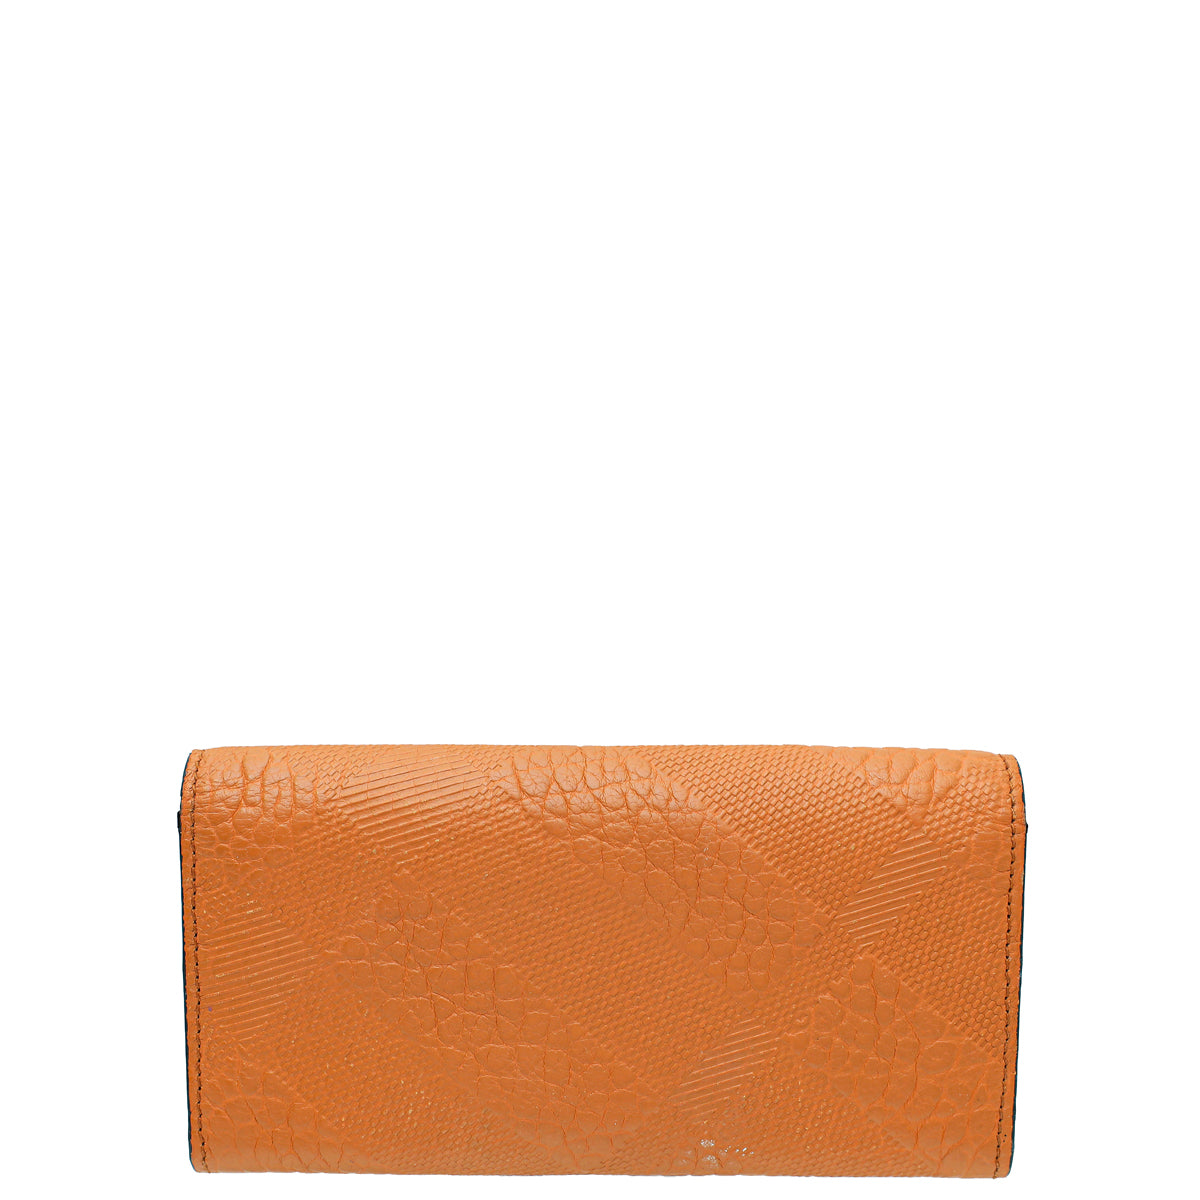 Burberry Orange Embossed Check Continental Wallet